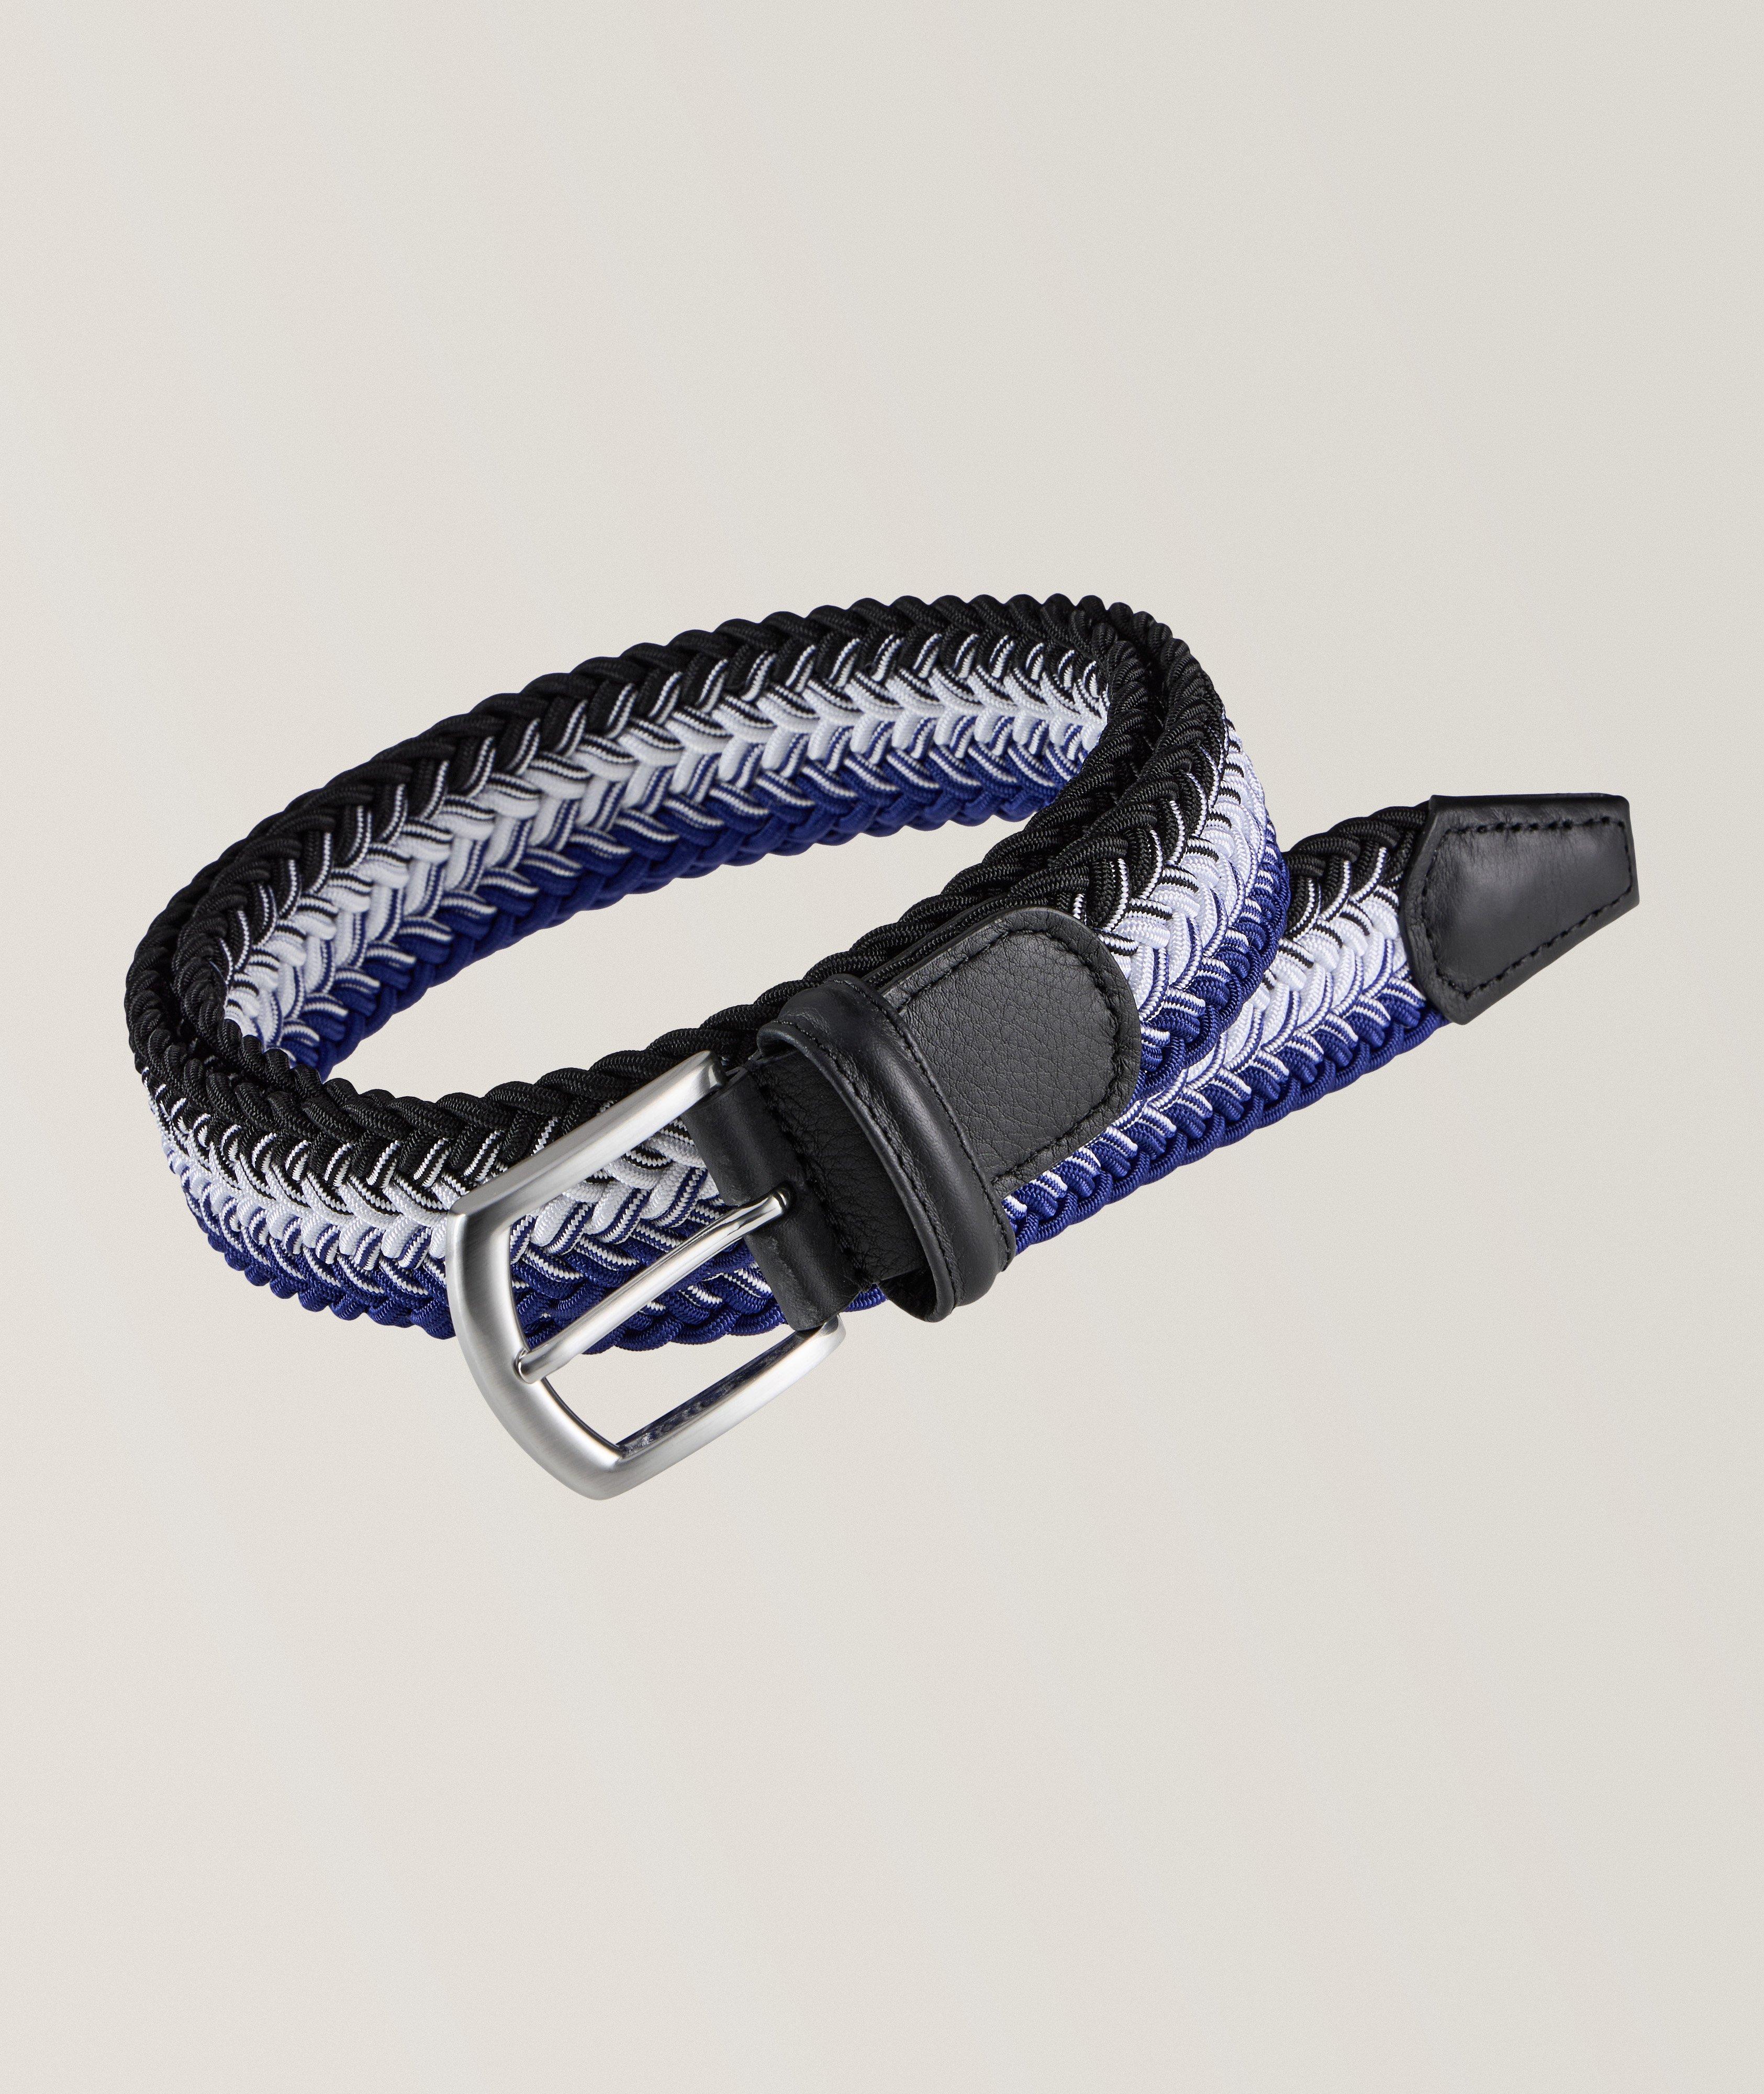 Tricolour-Mix Stretch-Woven Pin-Buckle Belt image 0